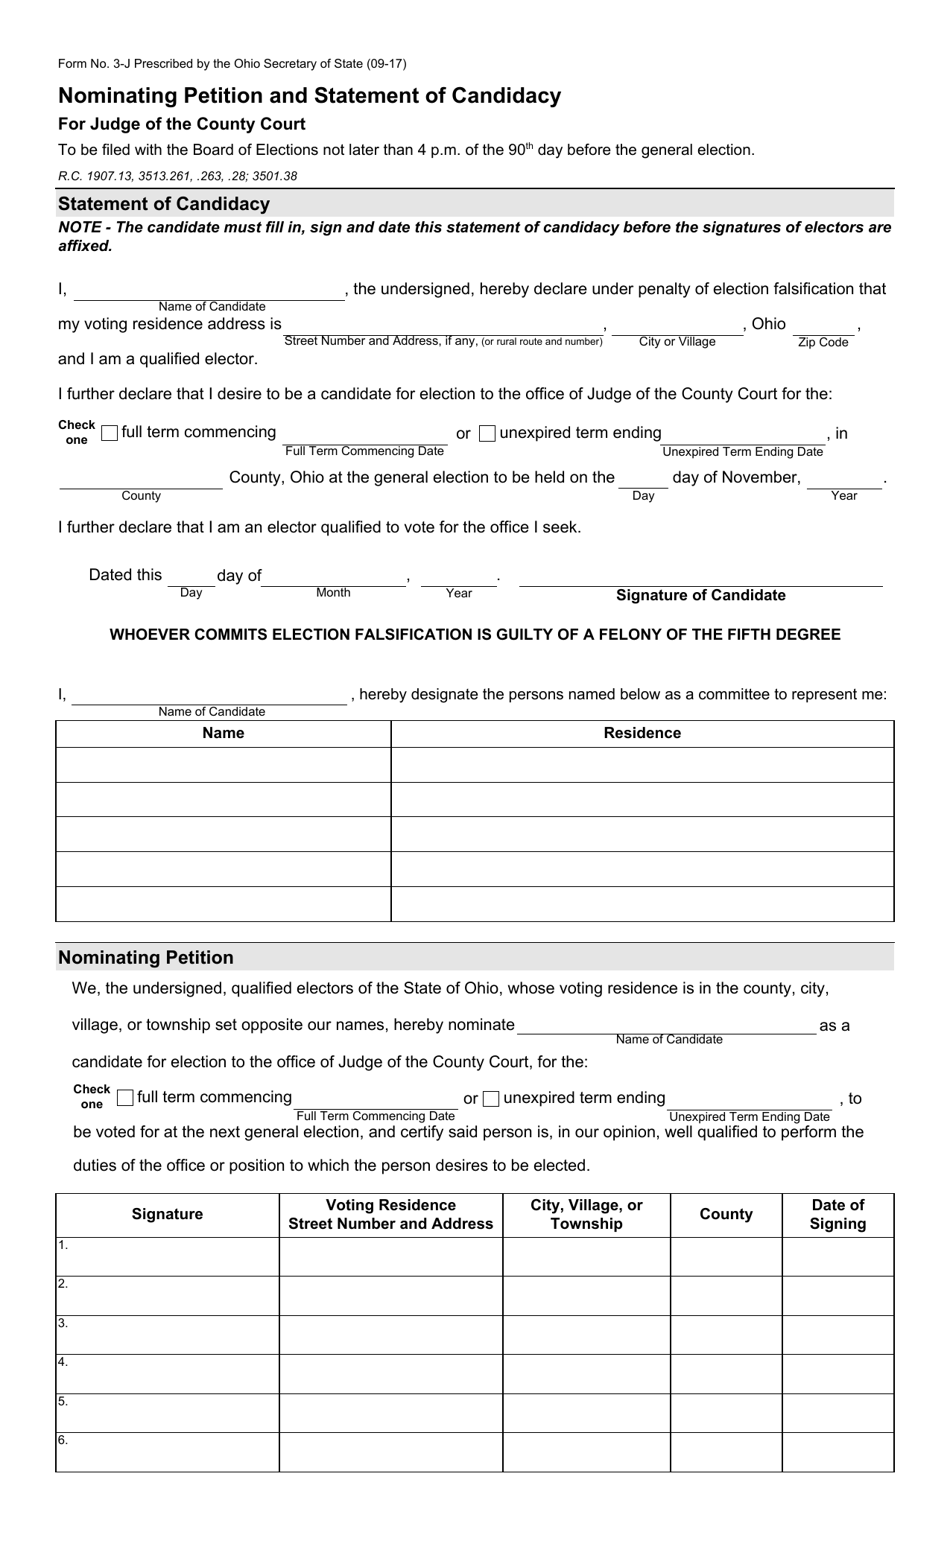 Form 3-J Nominating Petition and Statement of Candidacy for Judge of the County Court - Ohio, Page 1